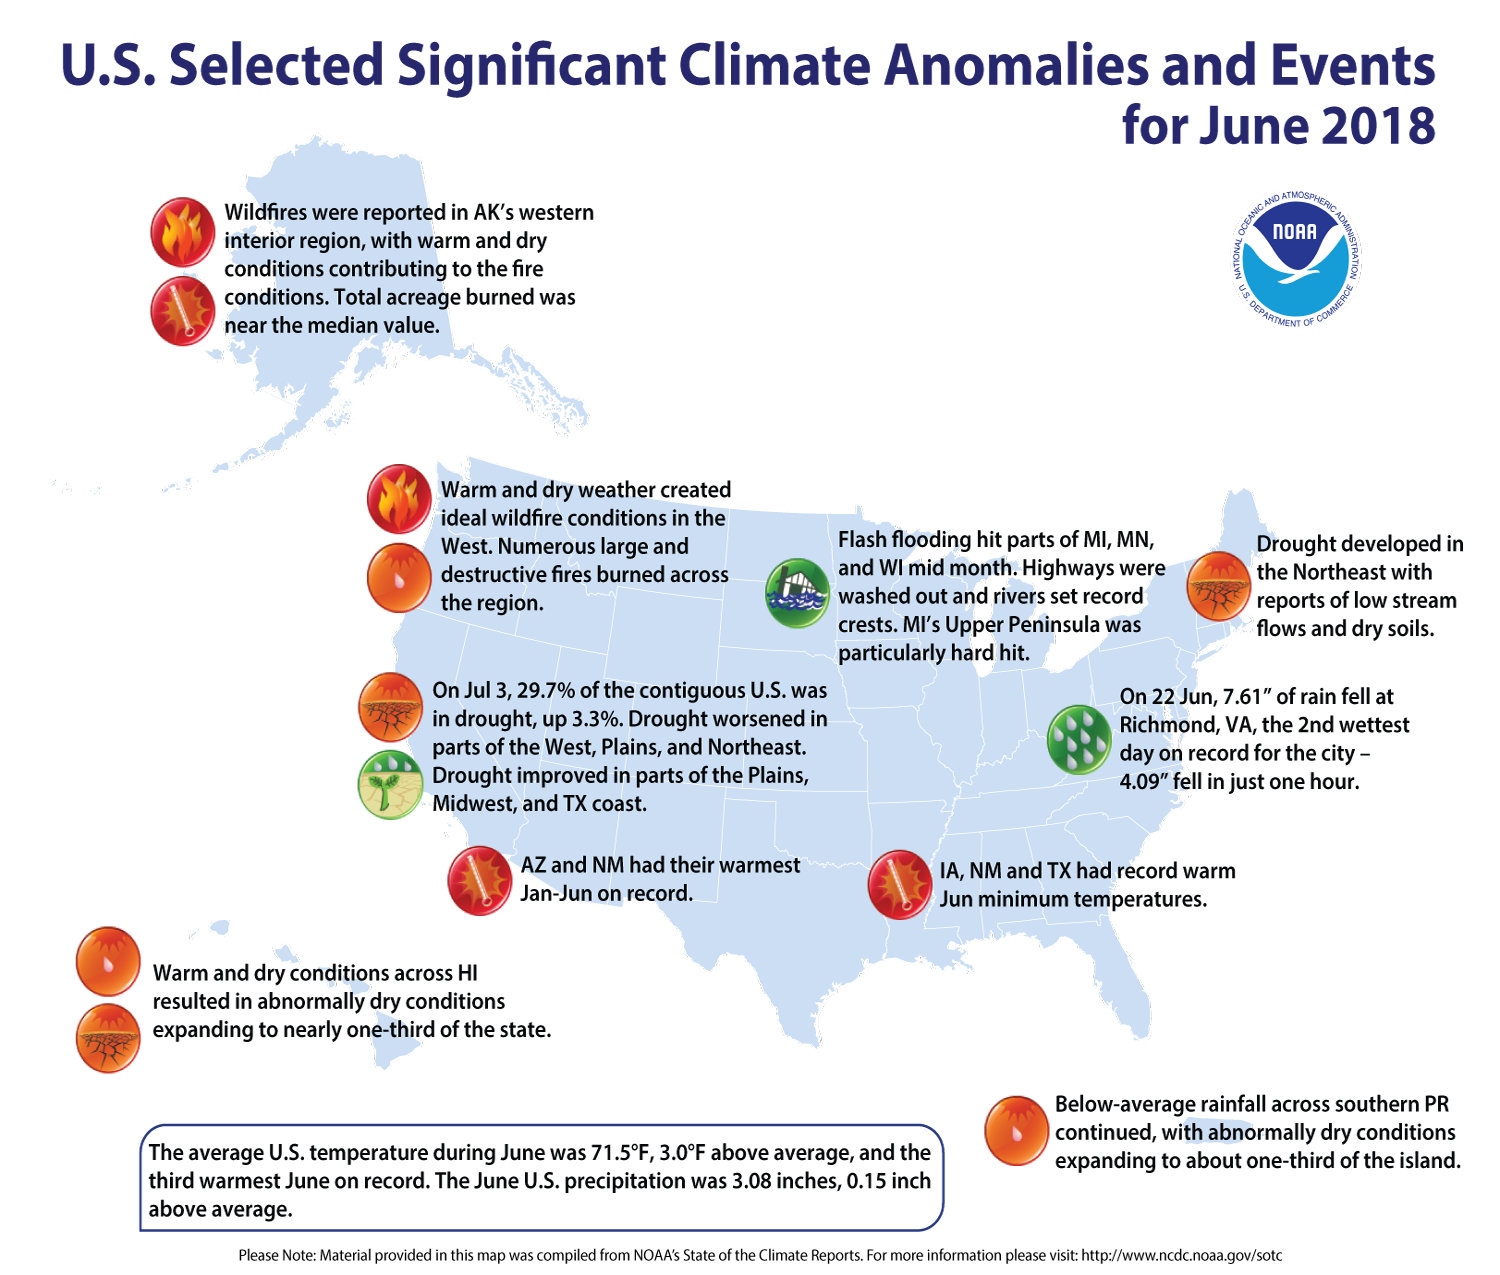 An annotated map of the U.S. showing notable climate events that occurred in June 2018. For details, see the bulleted list below in our story and on the Web at http://bit.ly/USClimate201806.